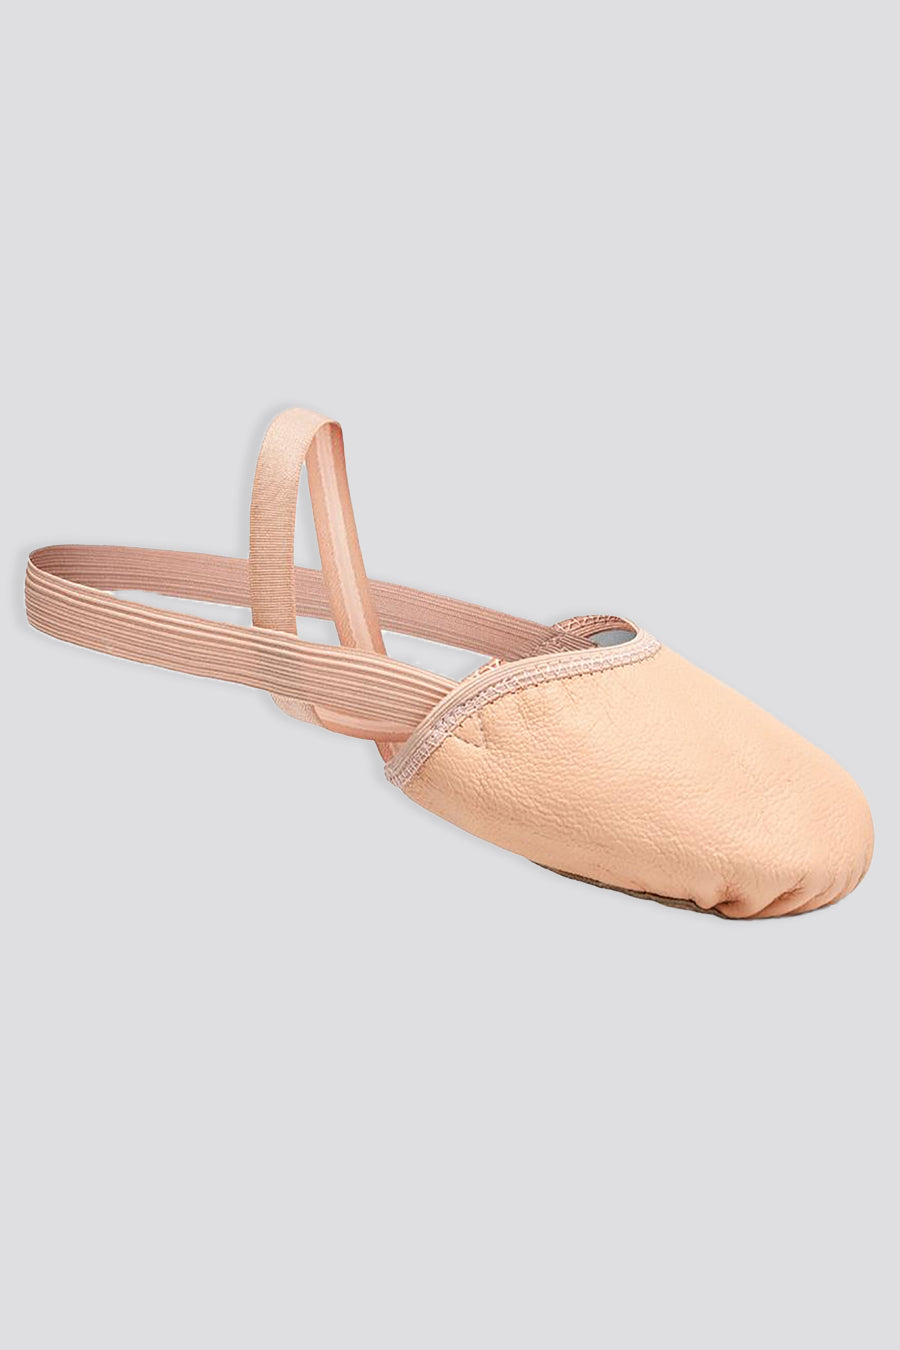 pirouette shoes ballet pink